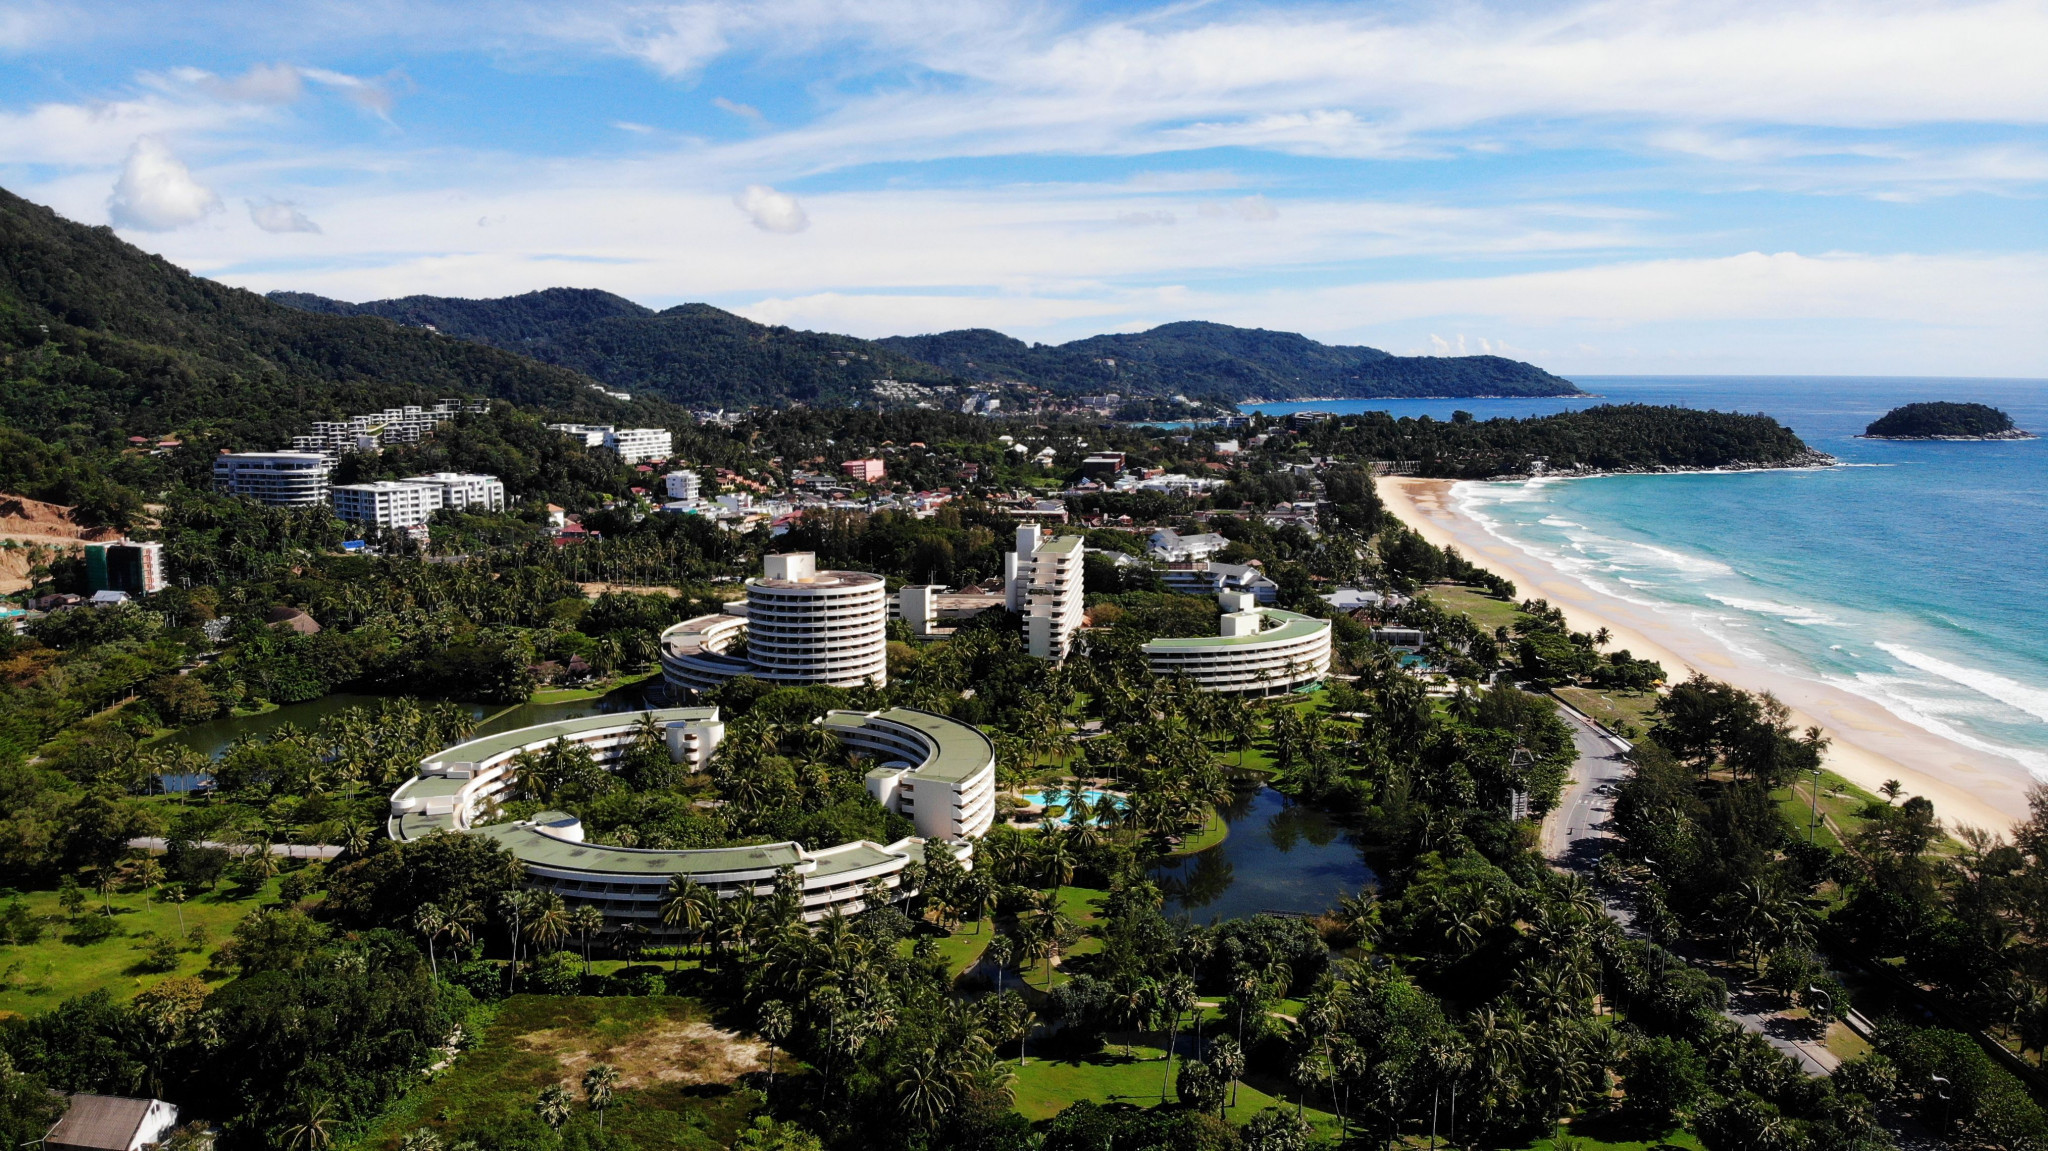 The Hilton Phuket Arcadia is planned to host the ISU Congress in June ©Getty Images